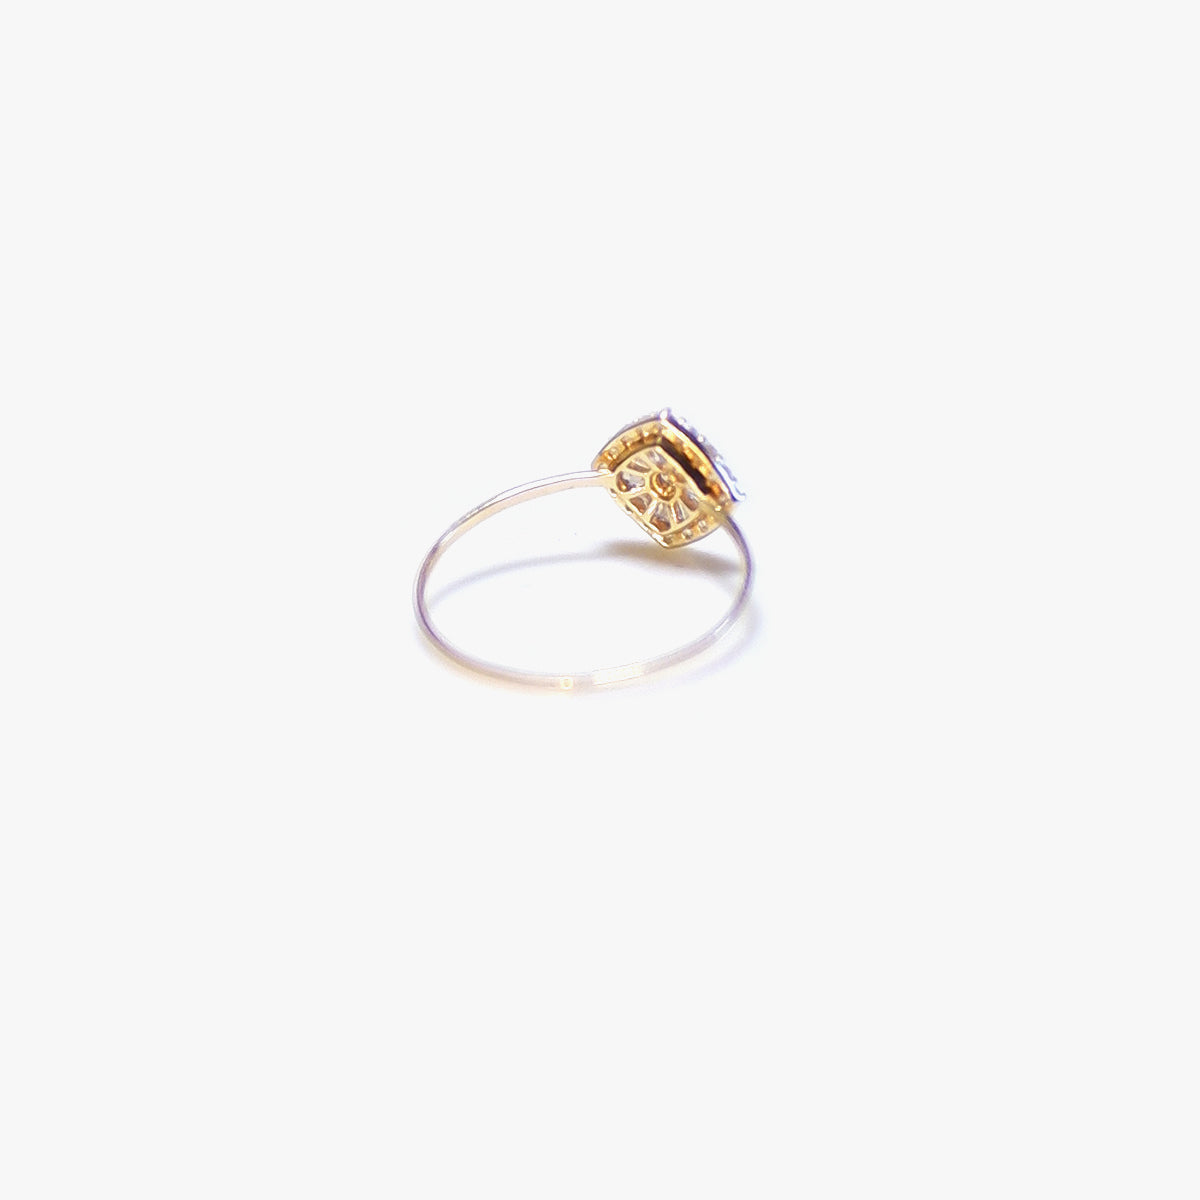 The Princess Ring in Solid Gold